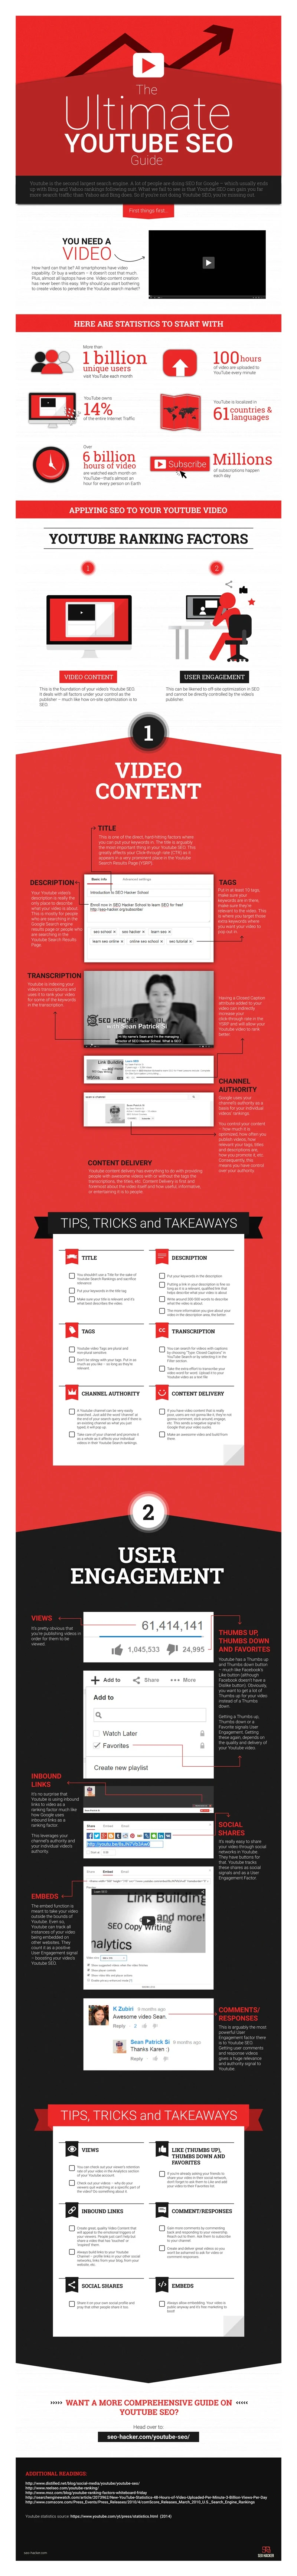 The Ultimate Youtube SEO Guide - #infographic